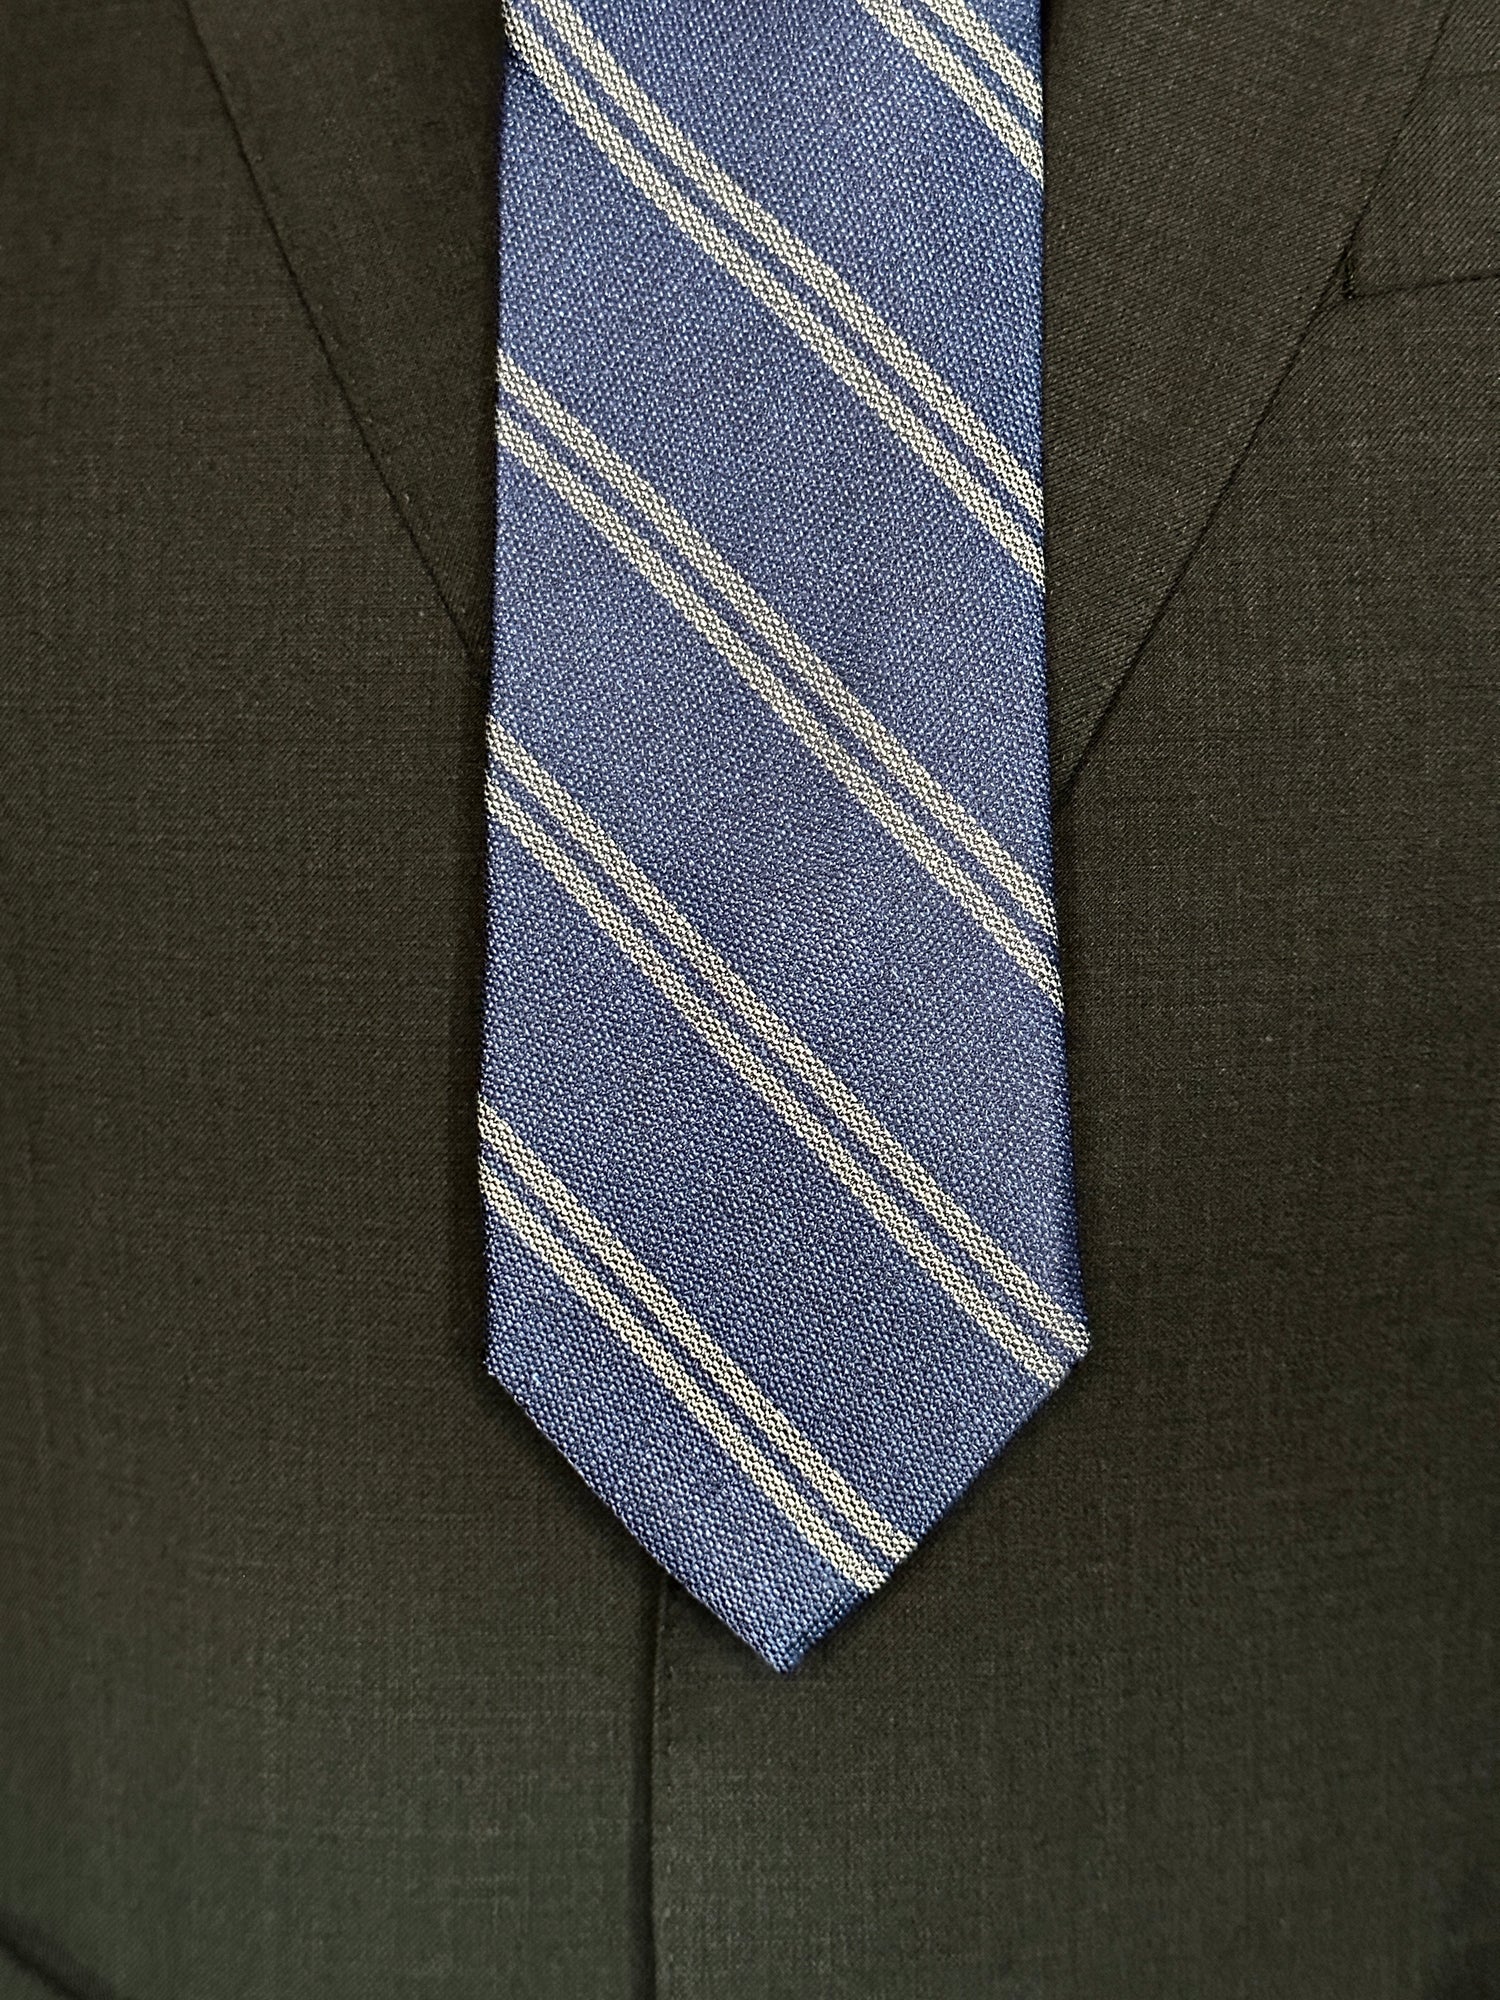 The textured woven silk of this blue denim tie is perfect for all seasons. The texture goes well with wool flannels, plaids and interesting mini checks. Made from 100% silk, the denim blue necktie combines well with pure white for that contrast or a pale grey to bring out the double charcoal stripe in the tie.